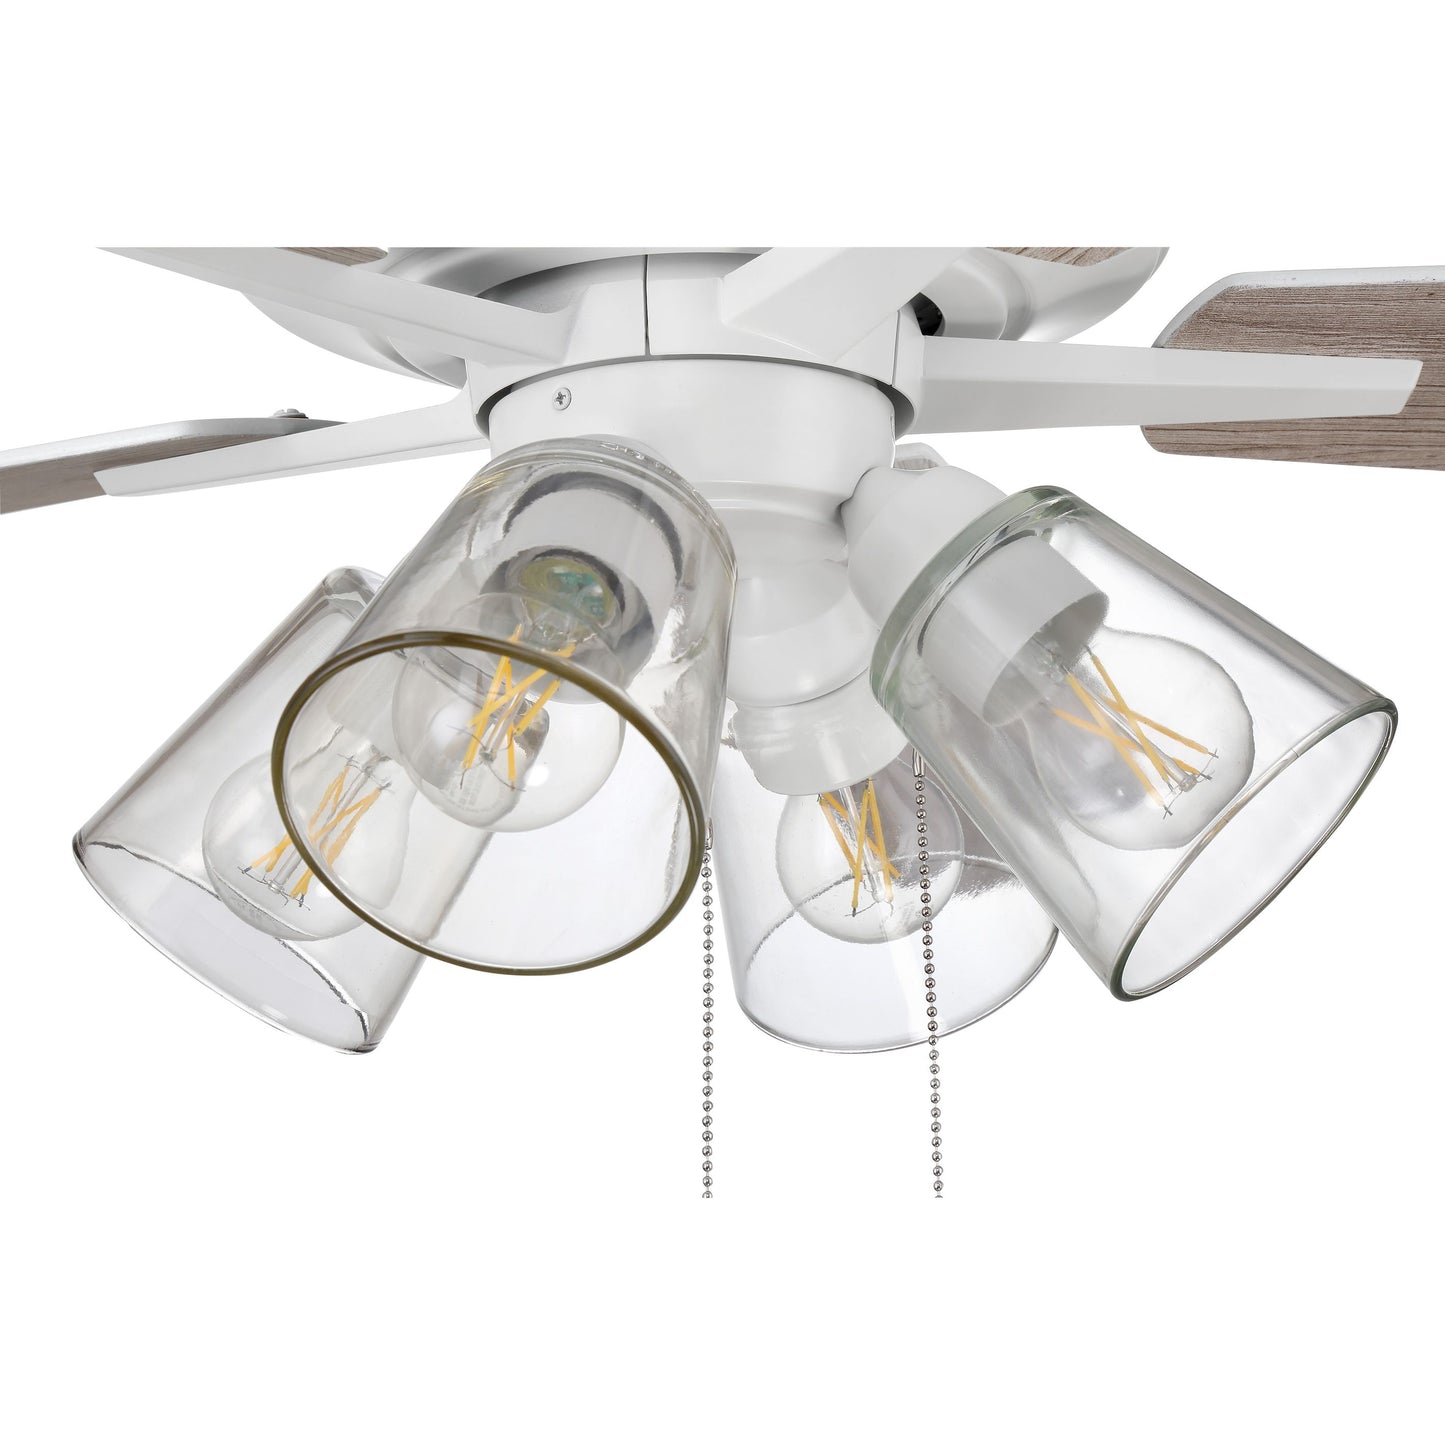 S104W5-60WWOK - Super Pro 104 60" 5 Blade Ceiling Fan with Light Kit - Pull Chain - White